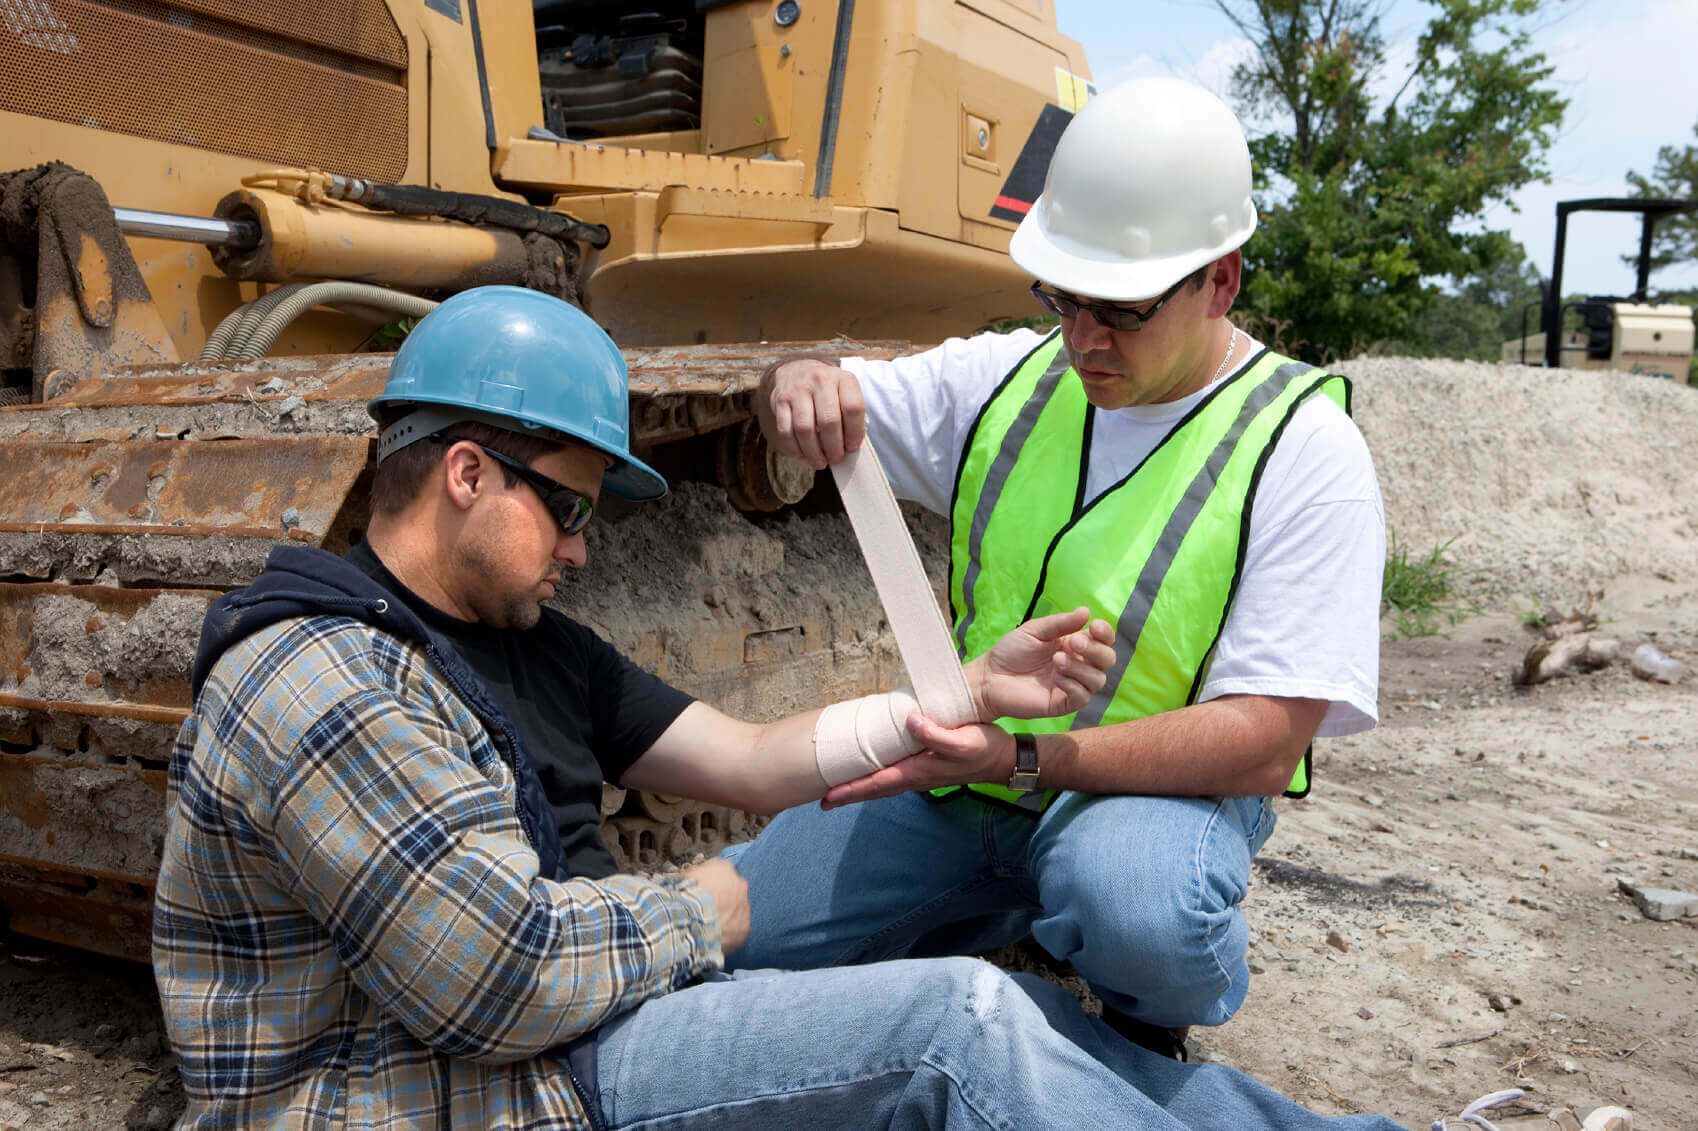 construction foreman applying first aid bandages to injured worker